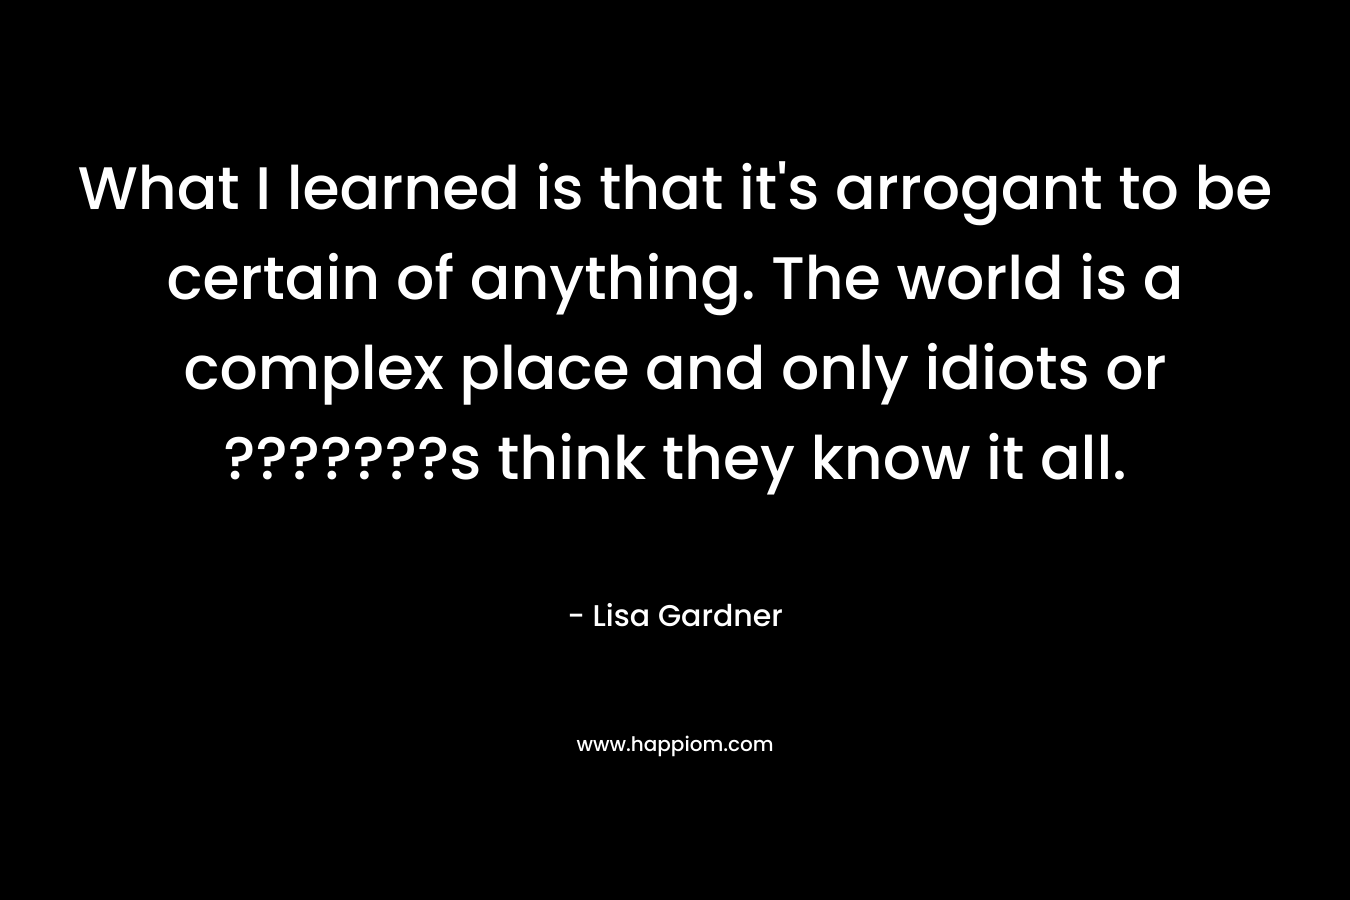 What I learned is that it’s arrogant to be certain of anything. The world is a complex place and only idiots or ???????s think they know it all. – Lisa Gardner